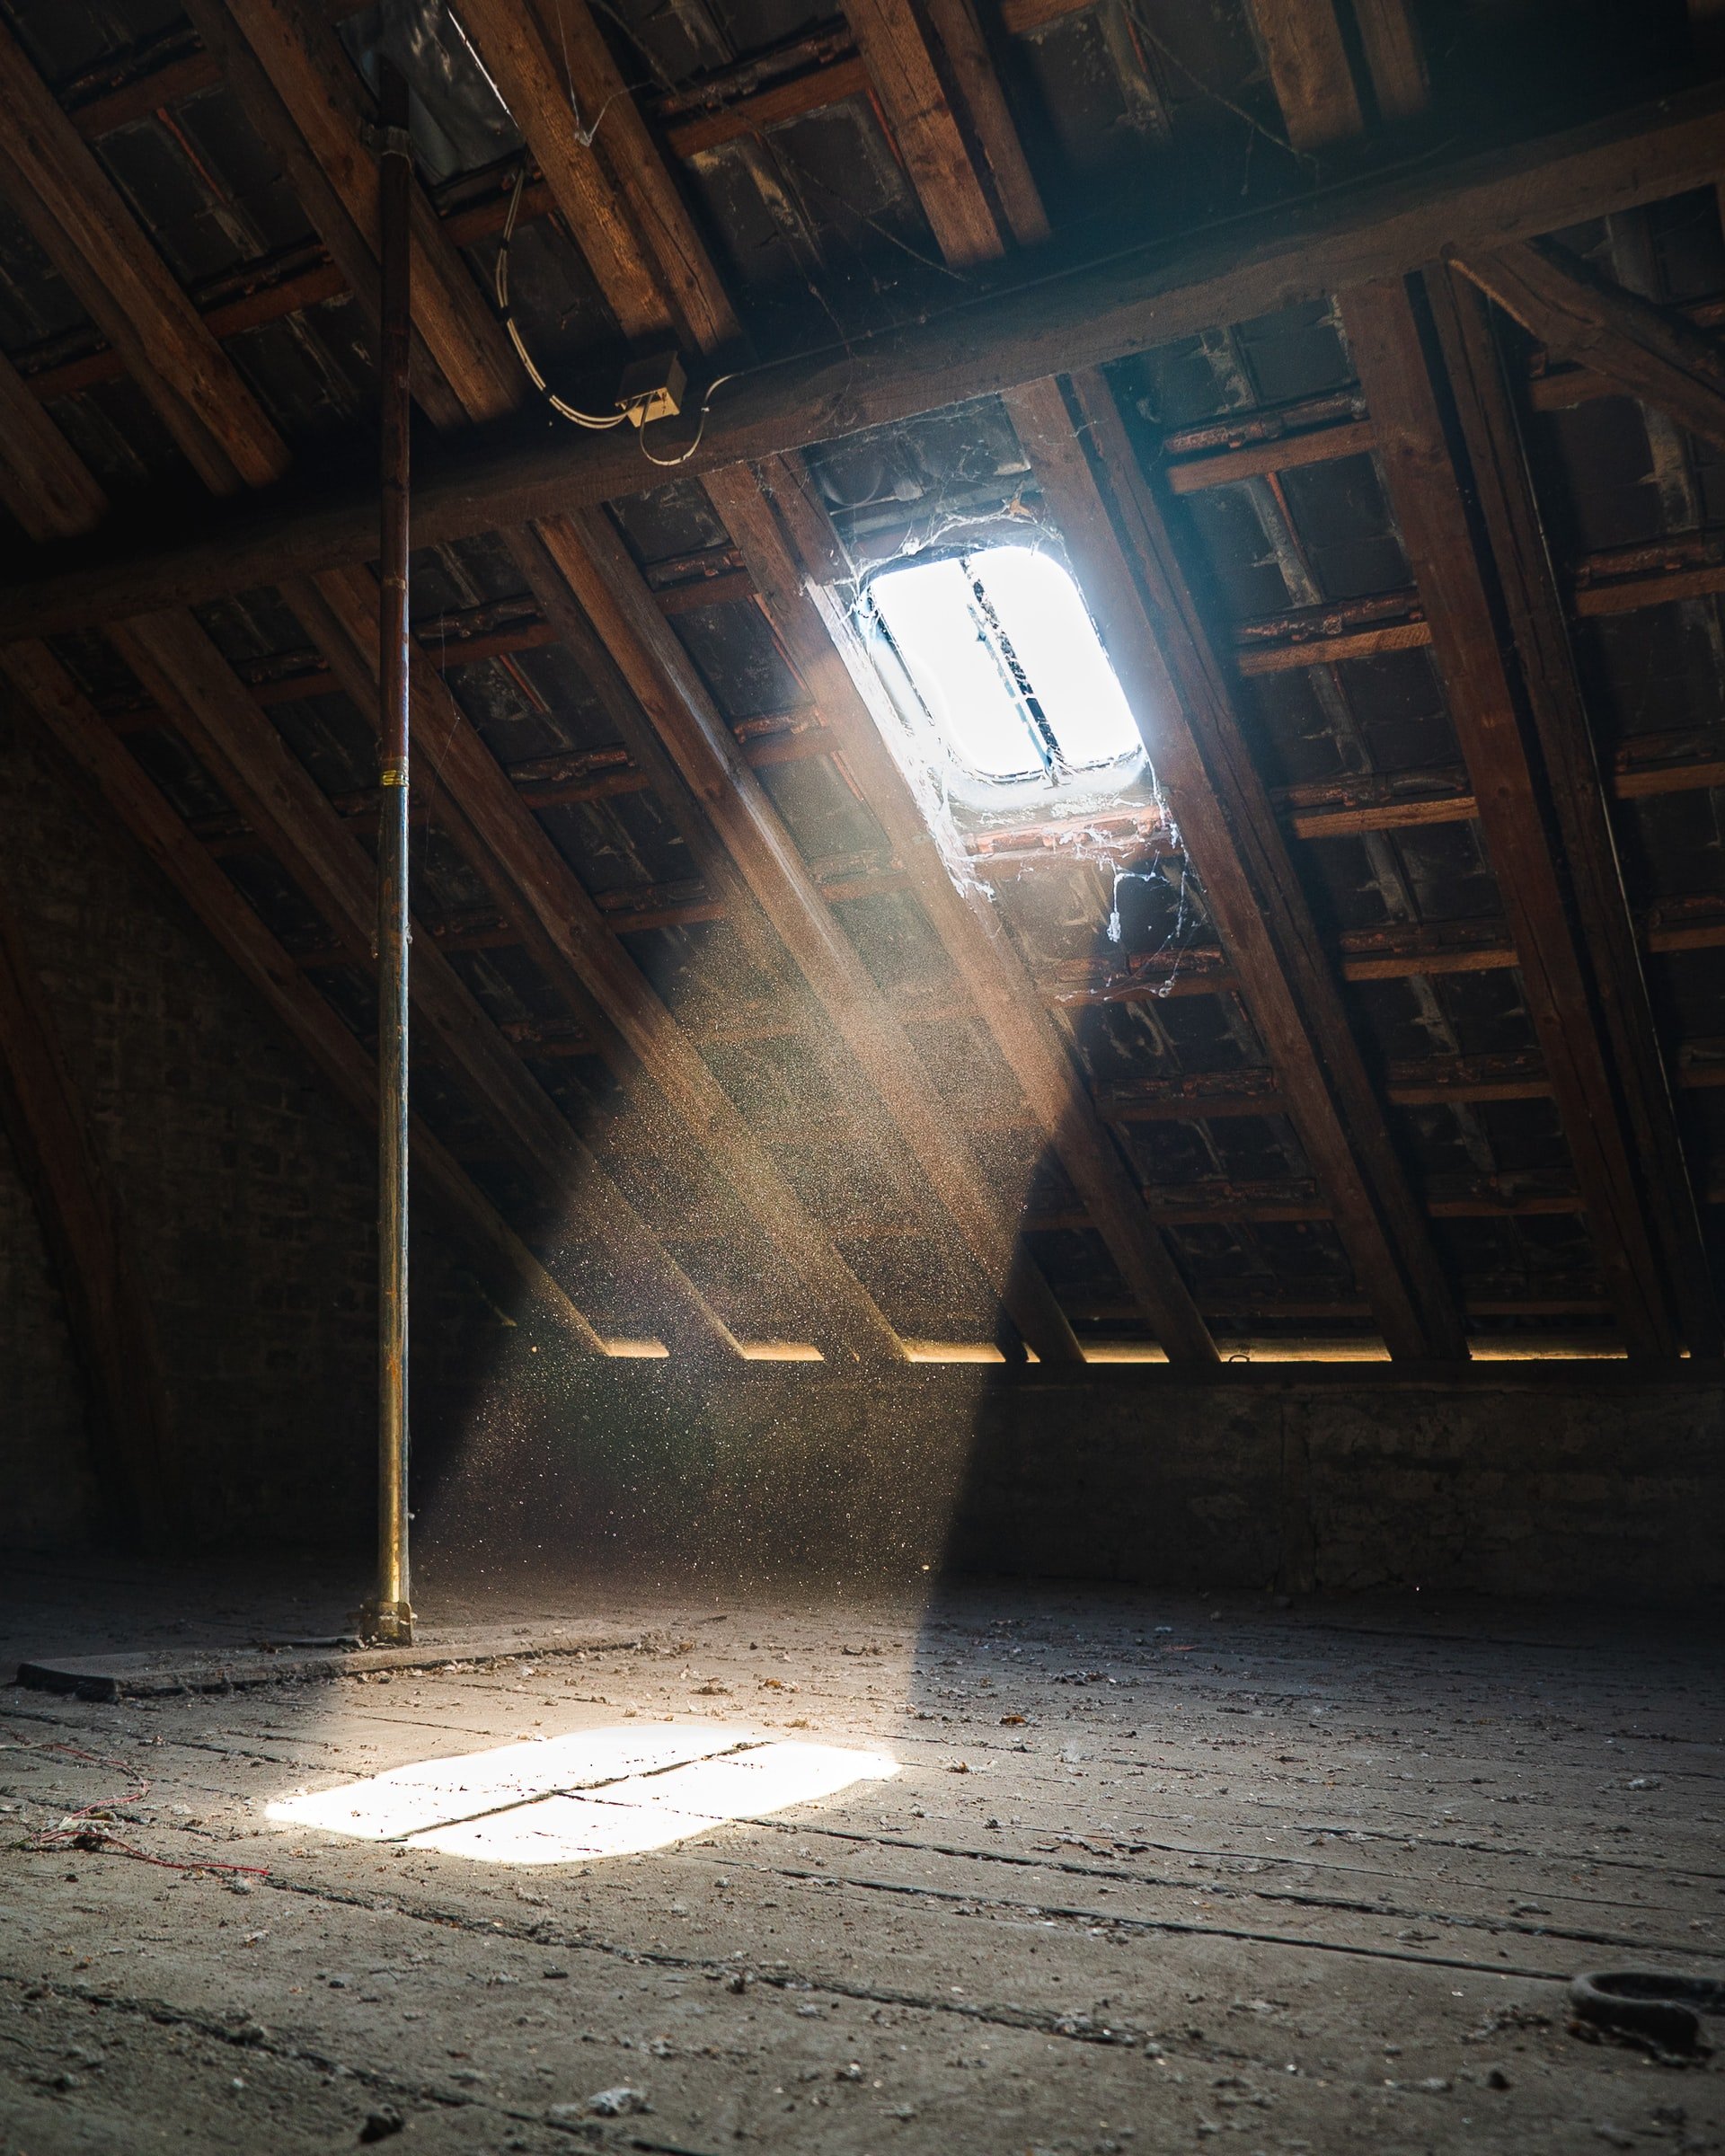 Natalie was in her attic looking for something important — a memory from her childhood. | Source: Unsplash